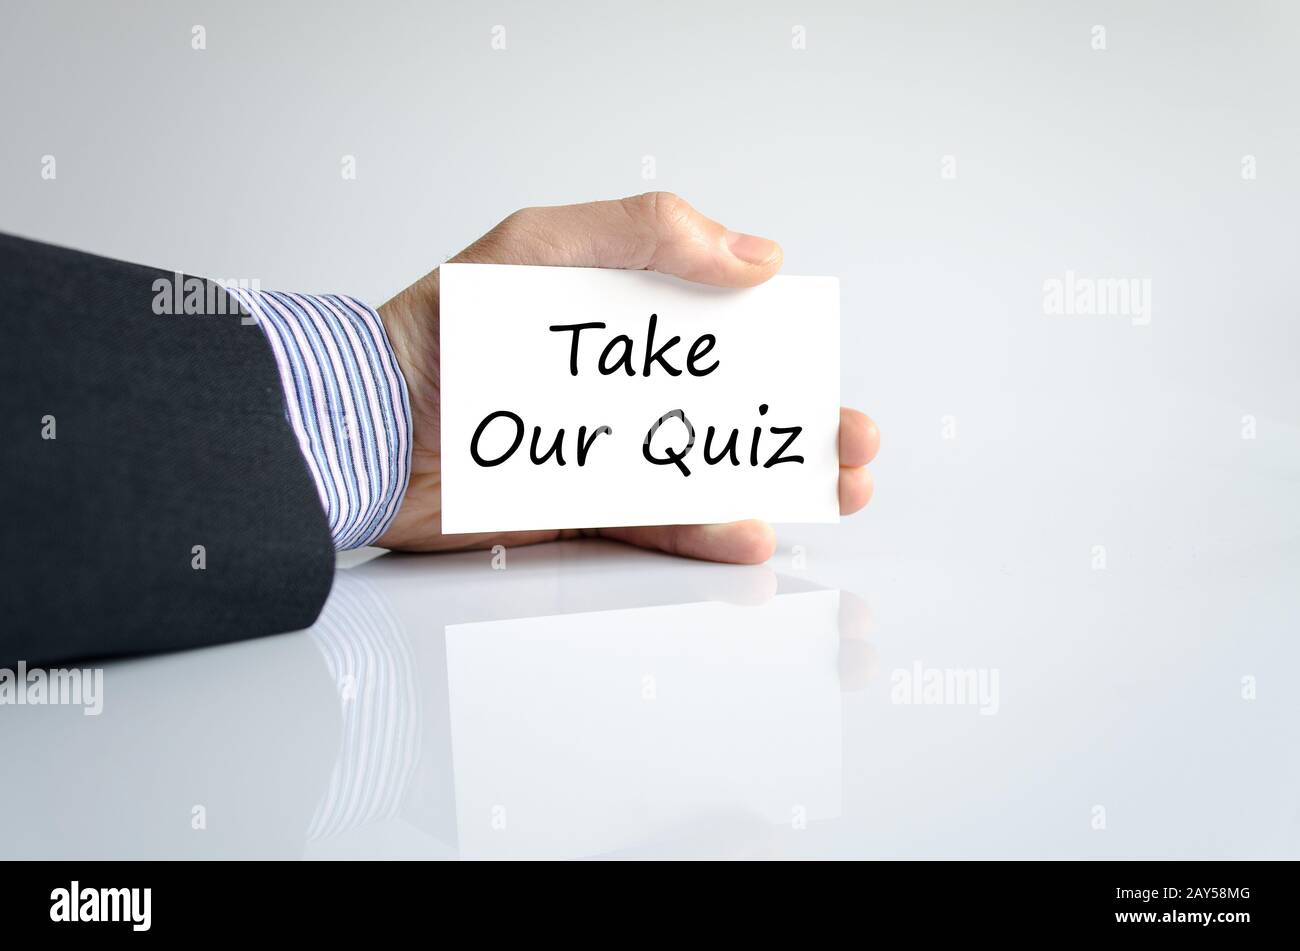 Take our quiz text concept Stock Photo